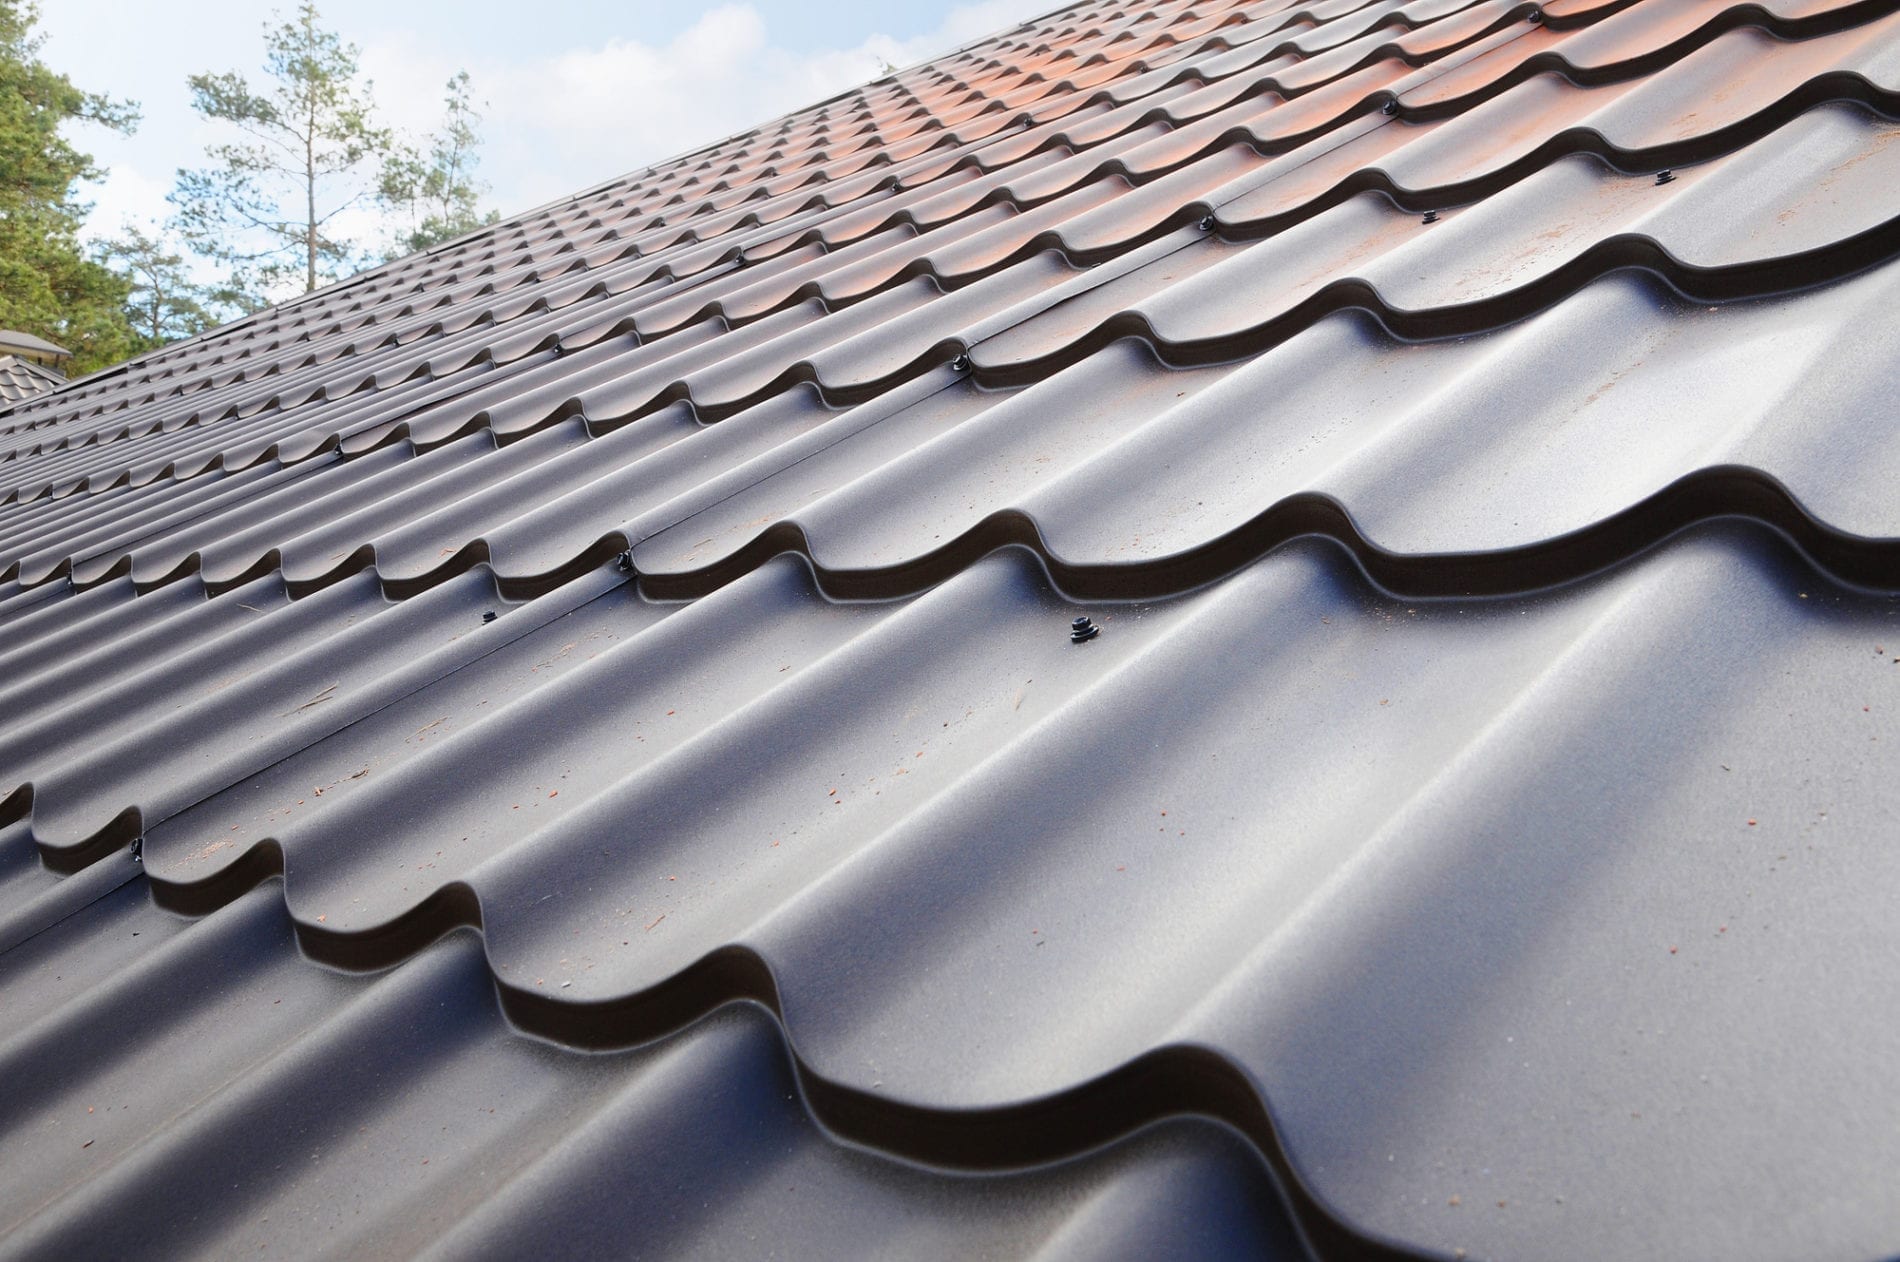 Metal vs Shingles - Which Roof is Best? - Bailey's Roofing